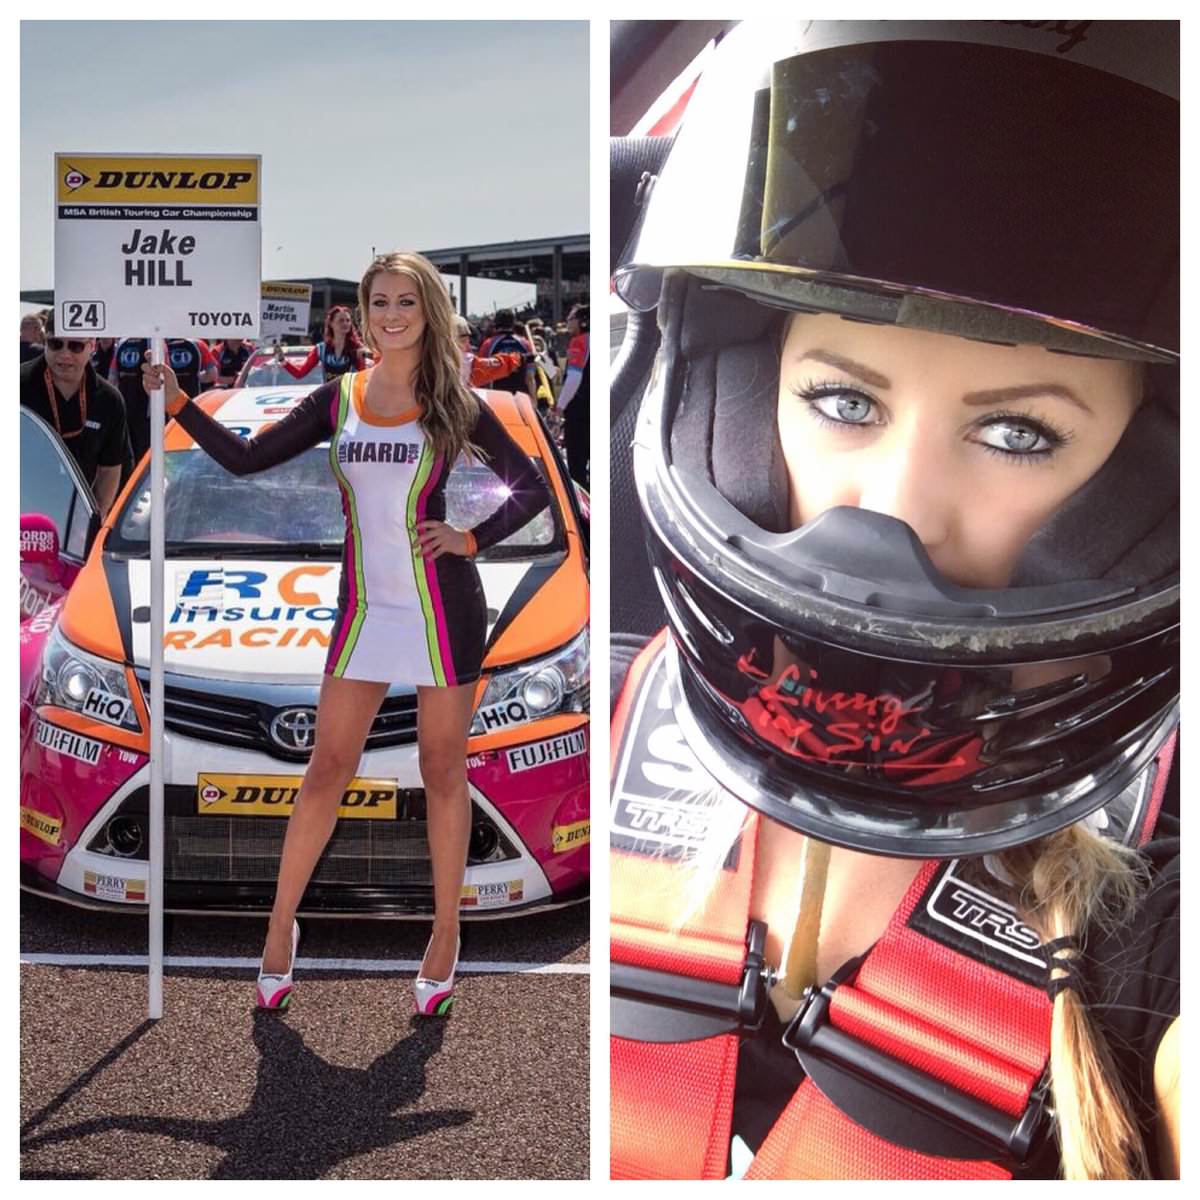 Remember when "Formula 1 and its FAI ruling body decided to ban the use of promotional models, known as grid girls,  from its events because they don't resonate with the brand values of F1 and clearly is at odds with modern-day societal norms"? Well... this time "booth babes" frequently featured at car shows are being phased out as well.